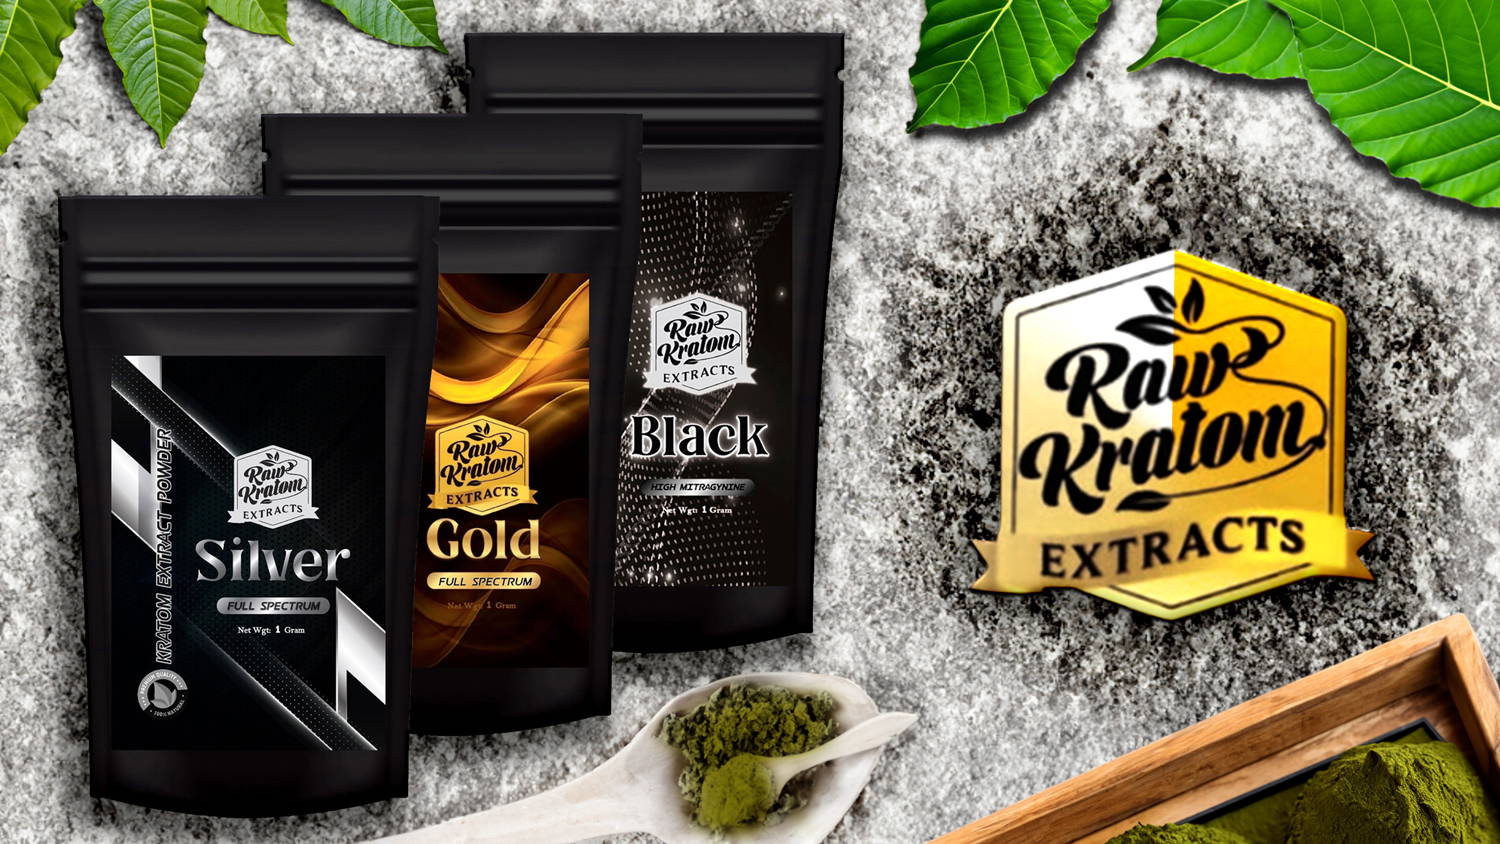 Raw Kratom Extract Powder Bundle Black, Gold, and Silver